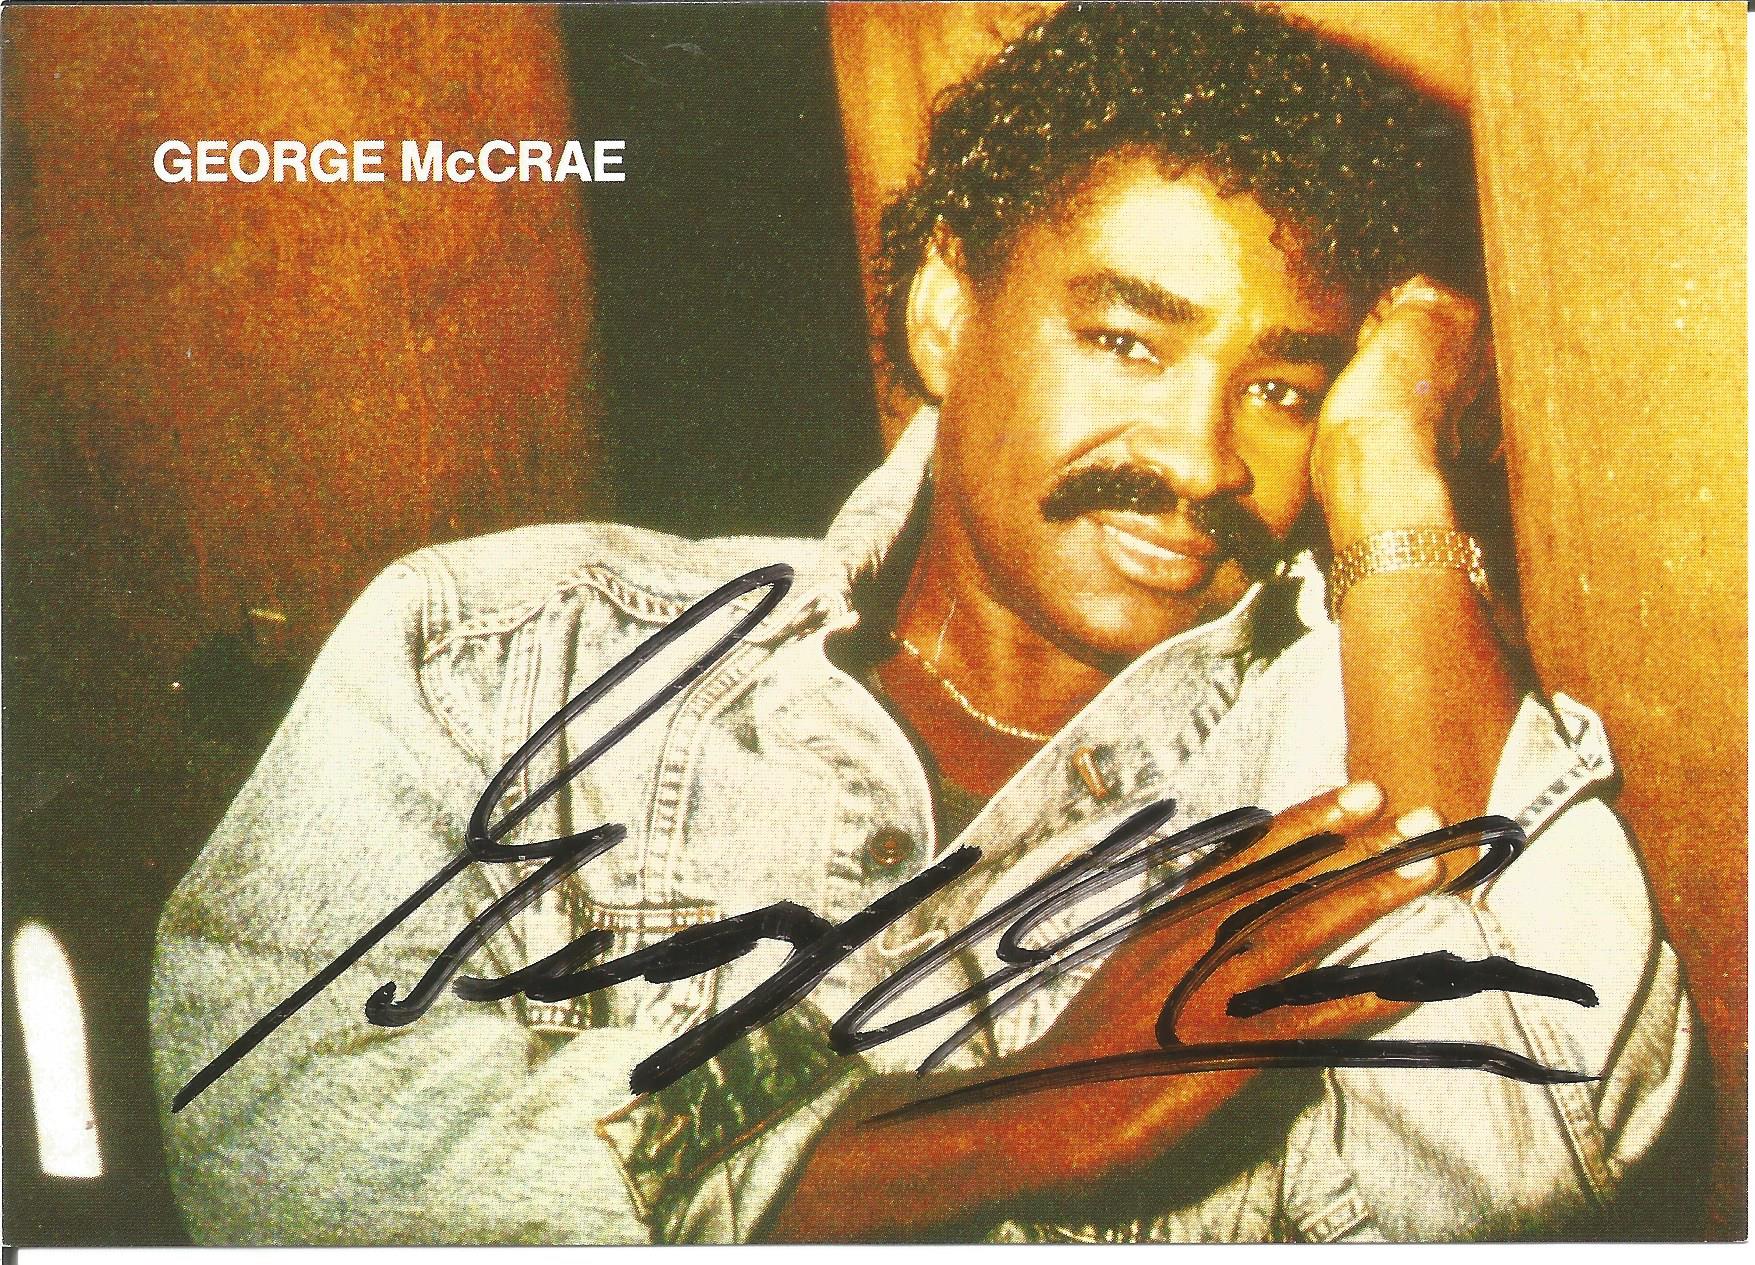 George McCrae signed 6x4 inch colour promo photo. Good Condition. All autographs come with a